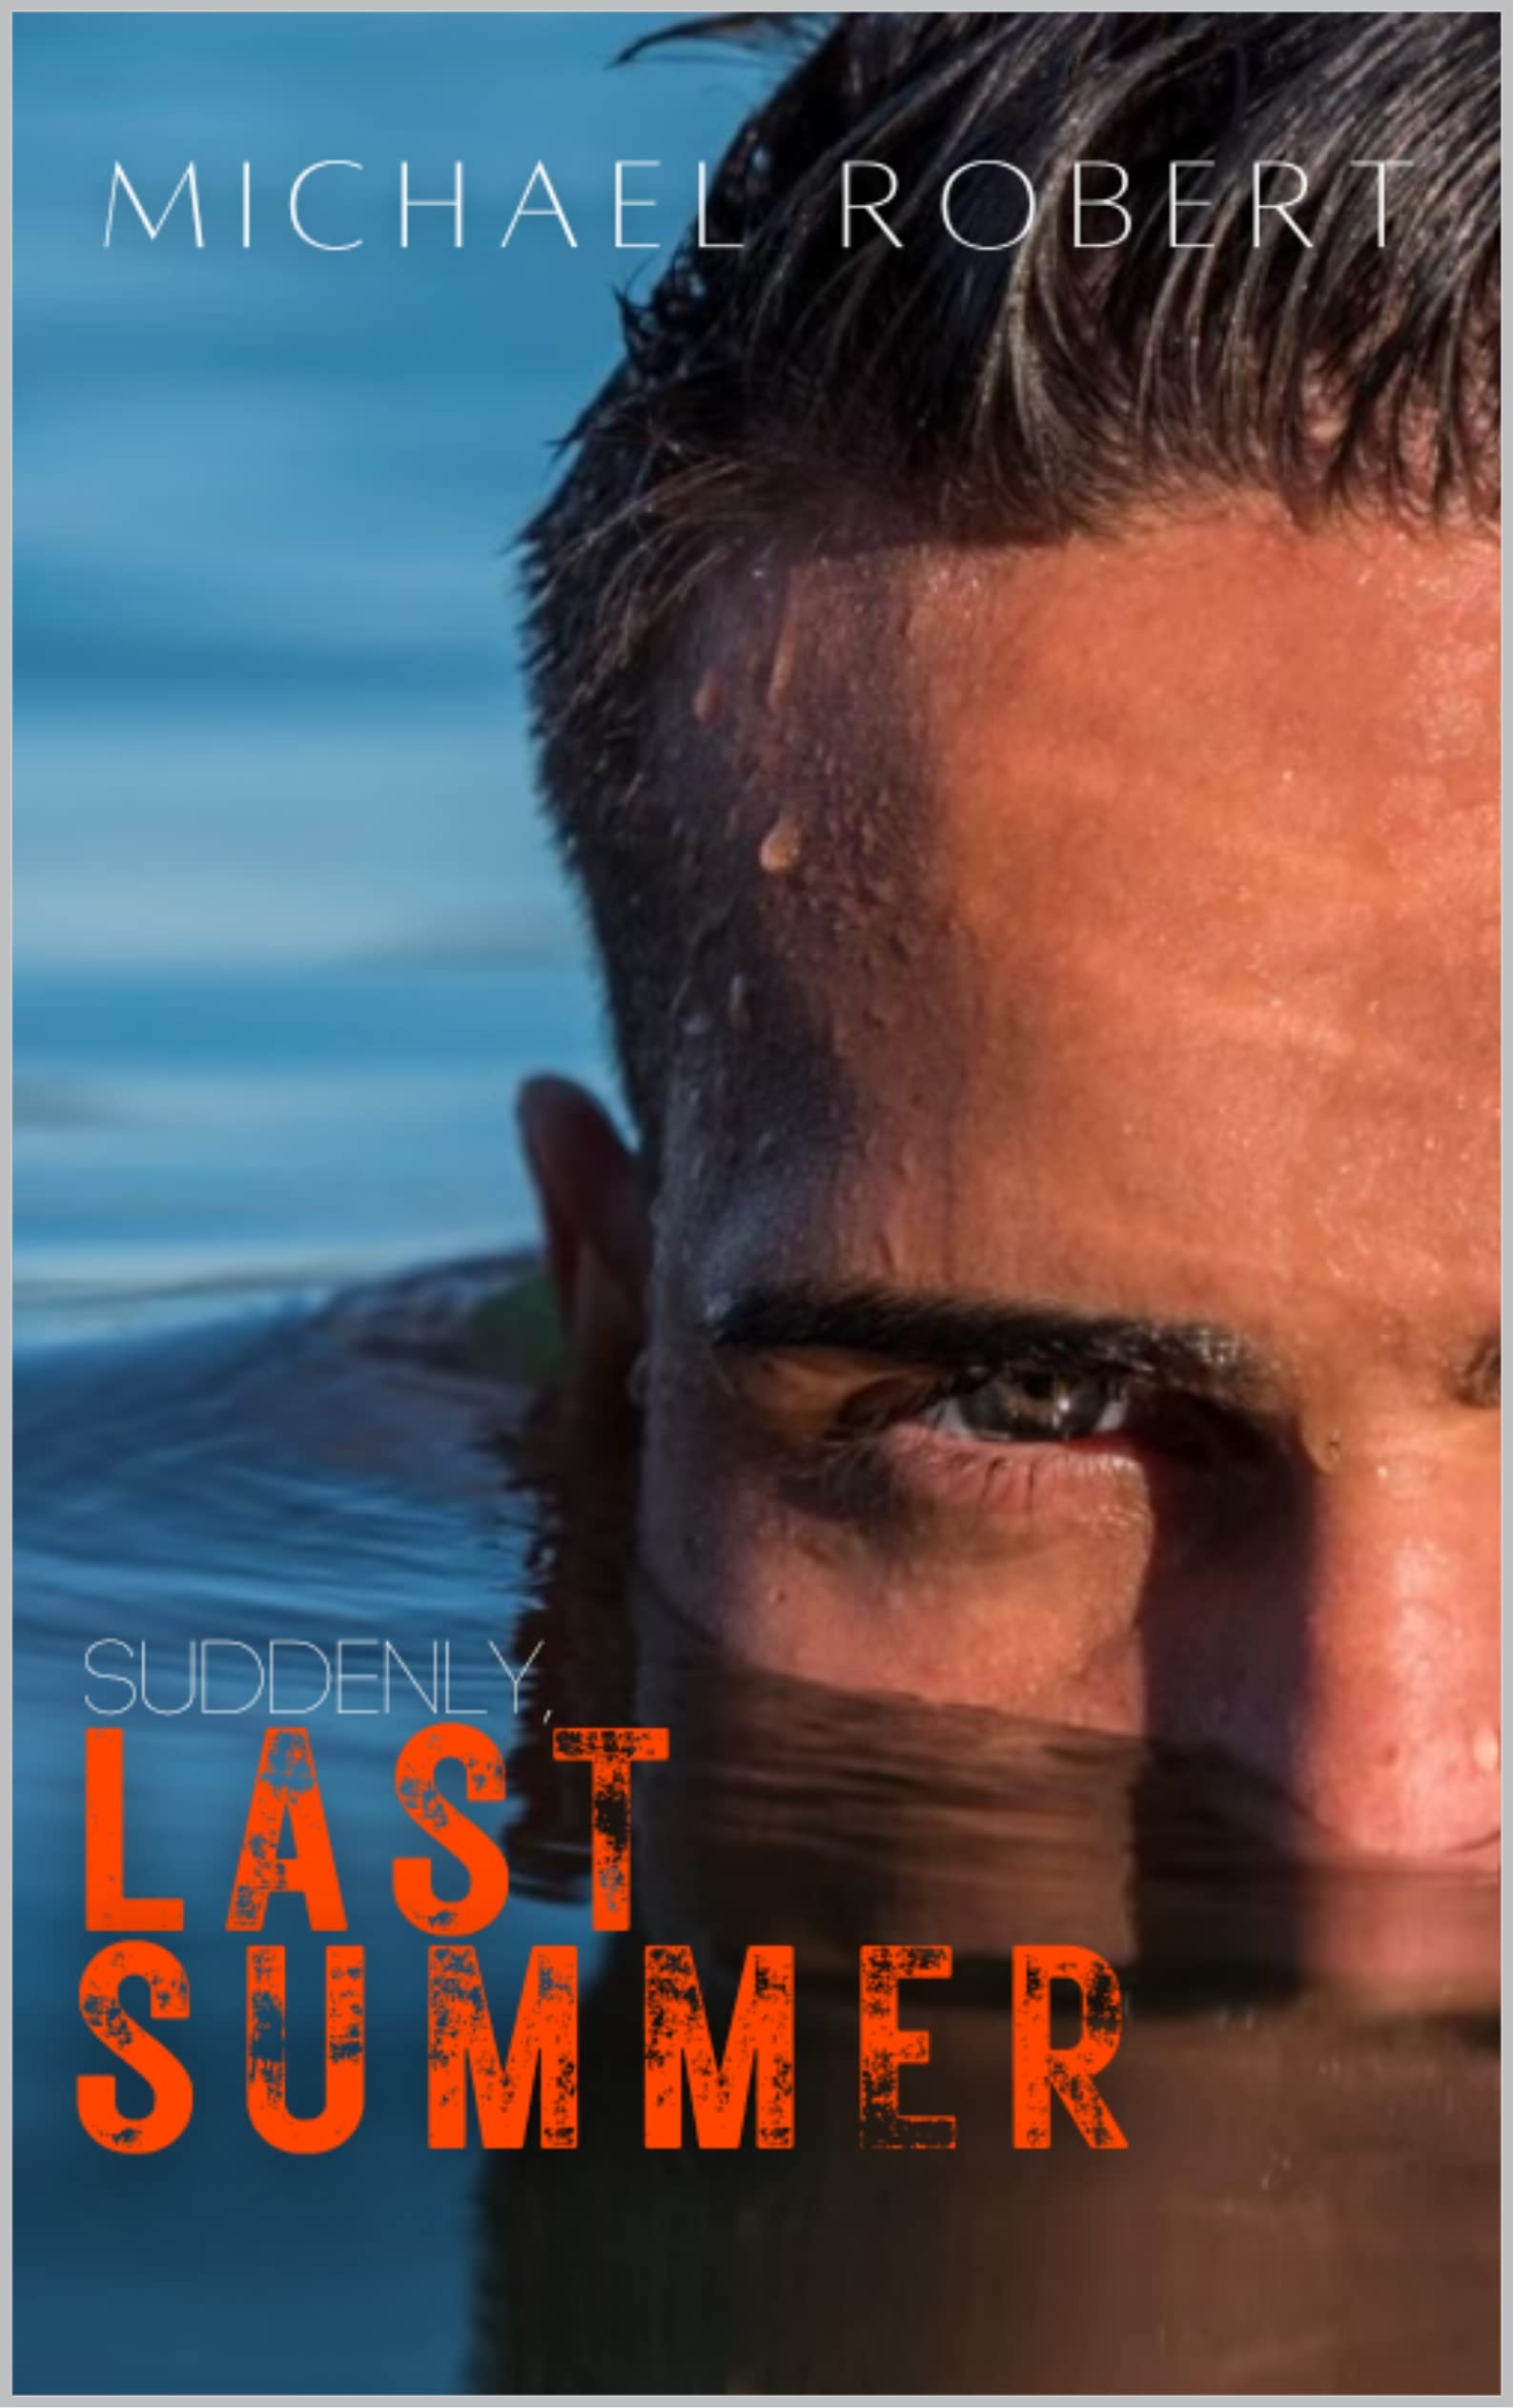 Suddenly, Last Summer by Michael Robert PDF Download